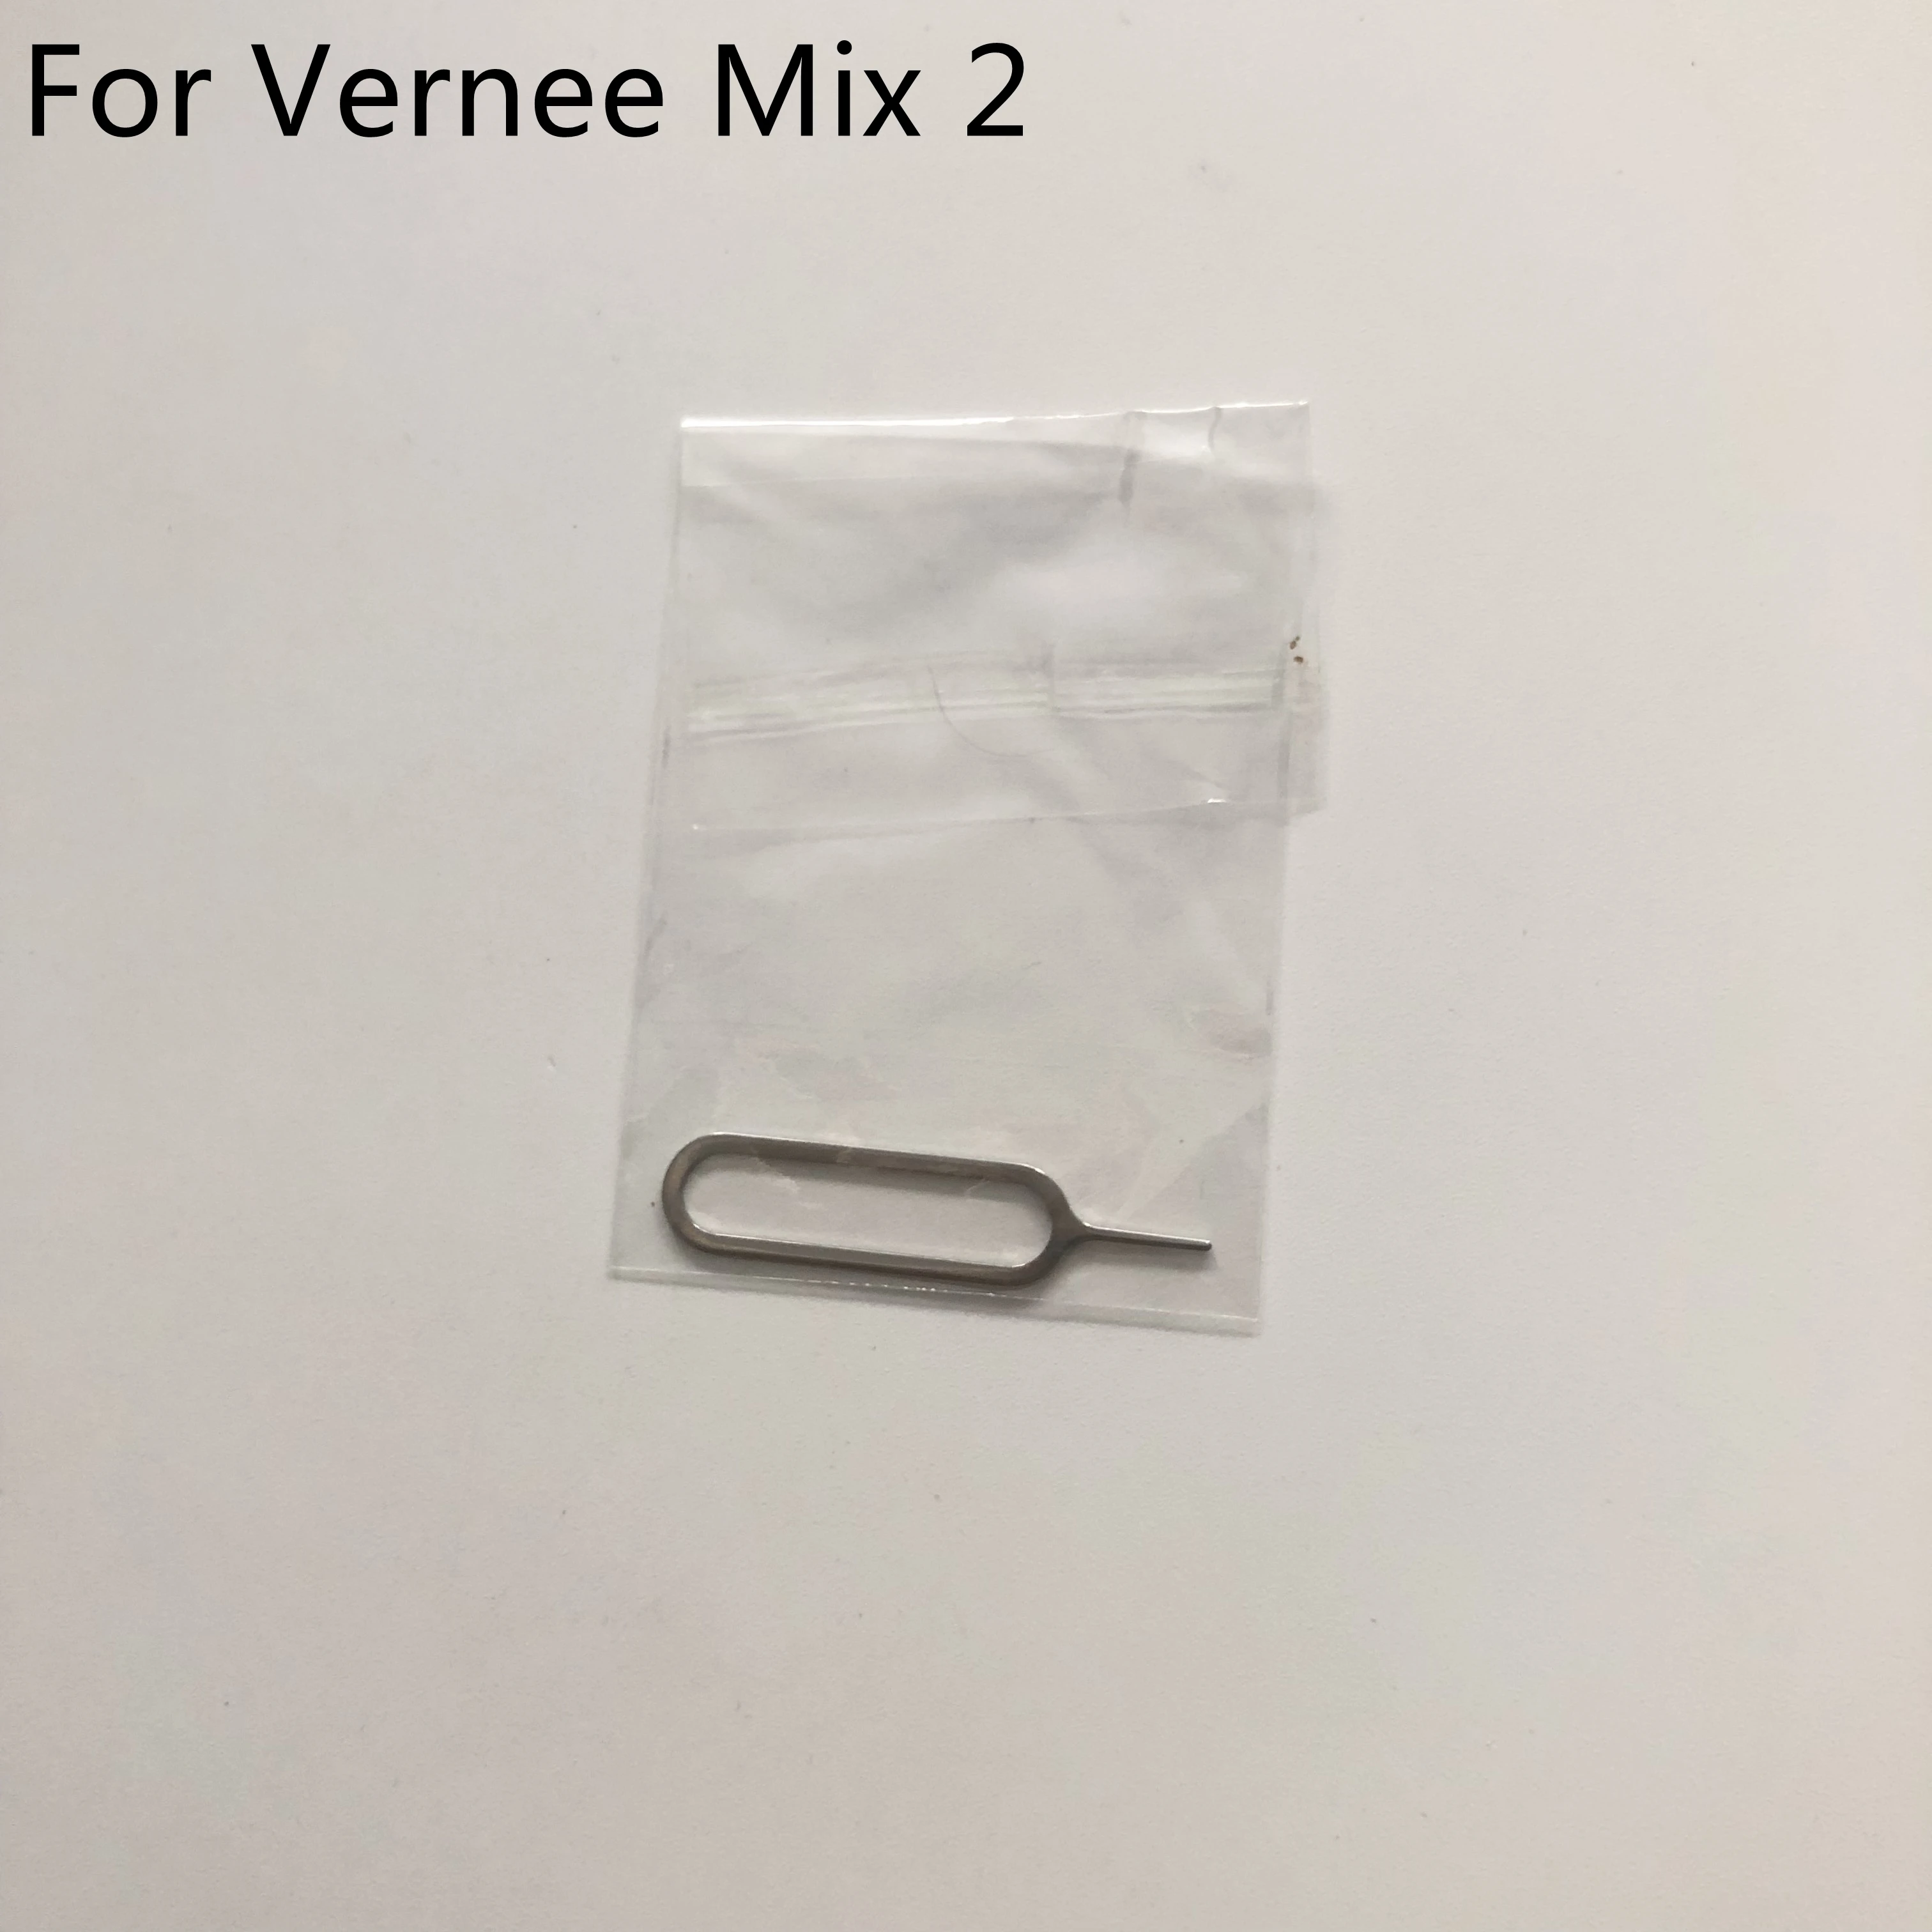 

Vernee Mix 2 Used SIM Card Eject Pin Handling Needle For Vernee Mix 2 MTK6757 Octa core 6.0 Inch 2160x1080 Smartphone